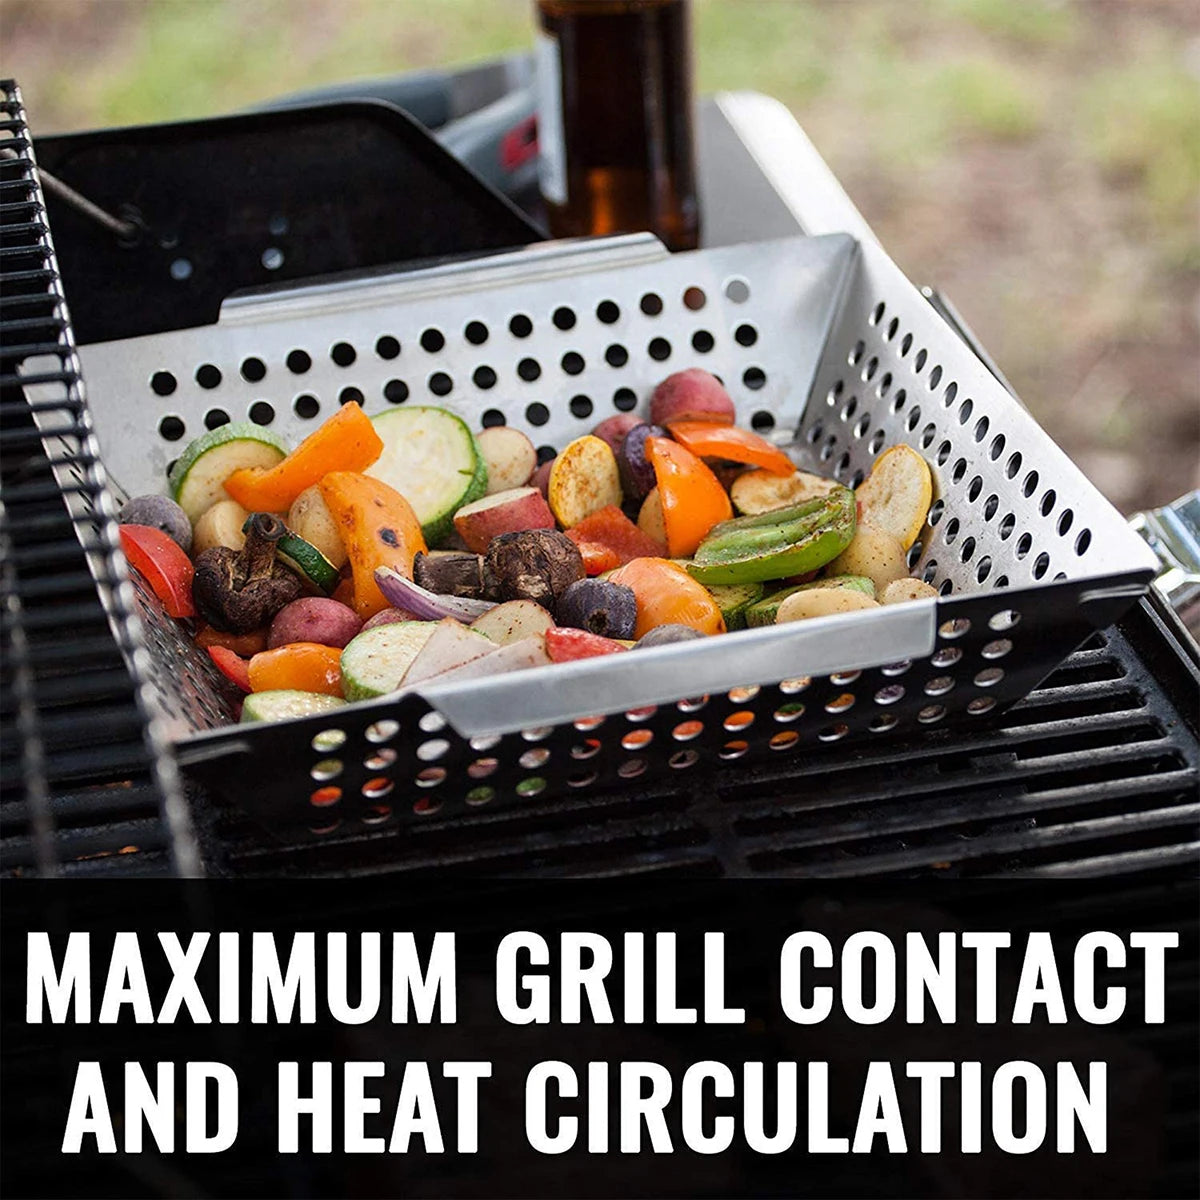 BBQ Grilling Basket Barbecue Stainless Steel Plate Cooking Veggies Seafood Meats Gadgets Tray Tools Home Kitchen Supplies